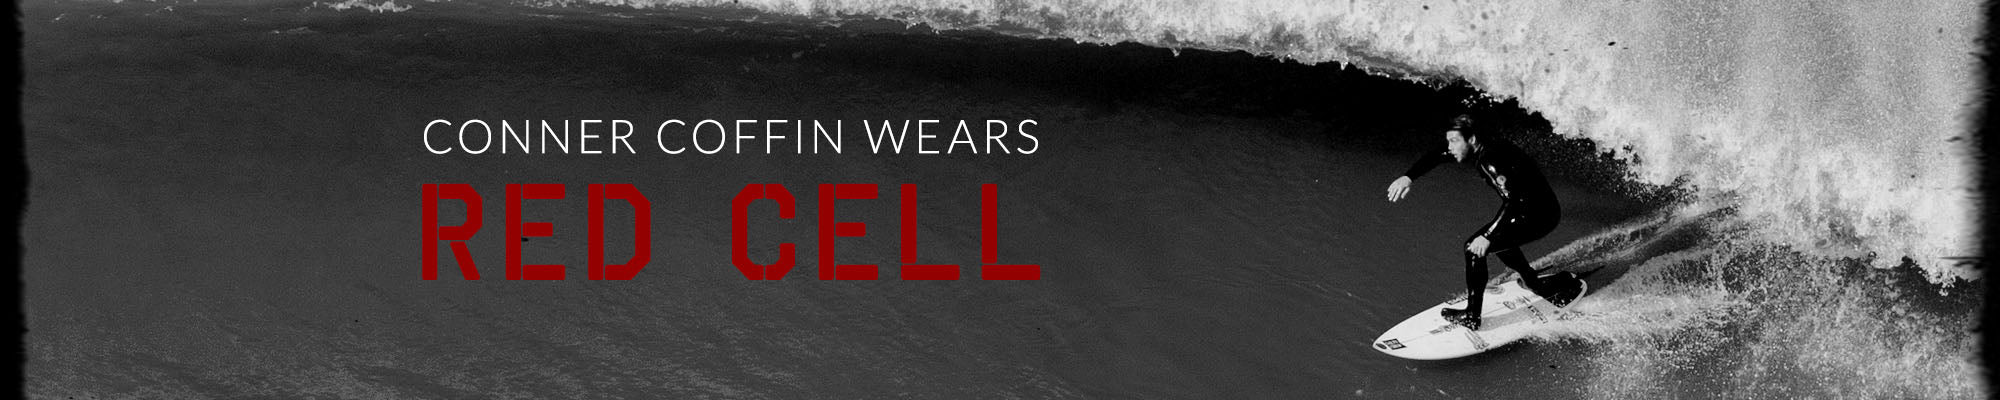 Men's Wetsuits - Red Cell